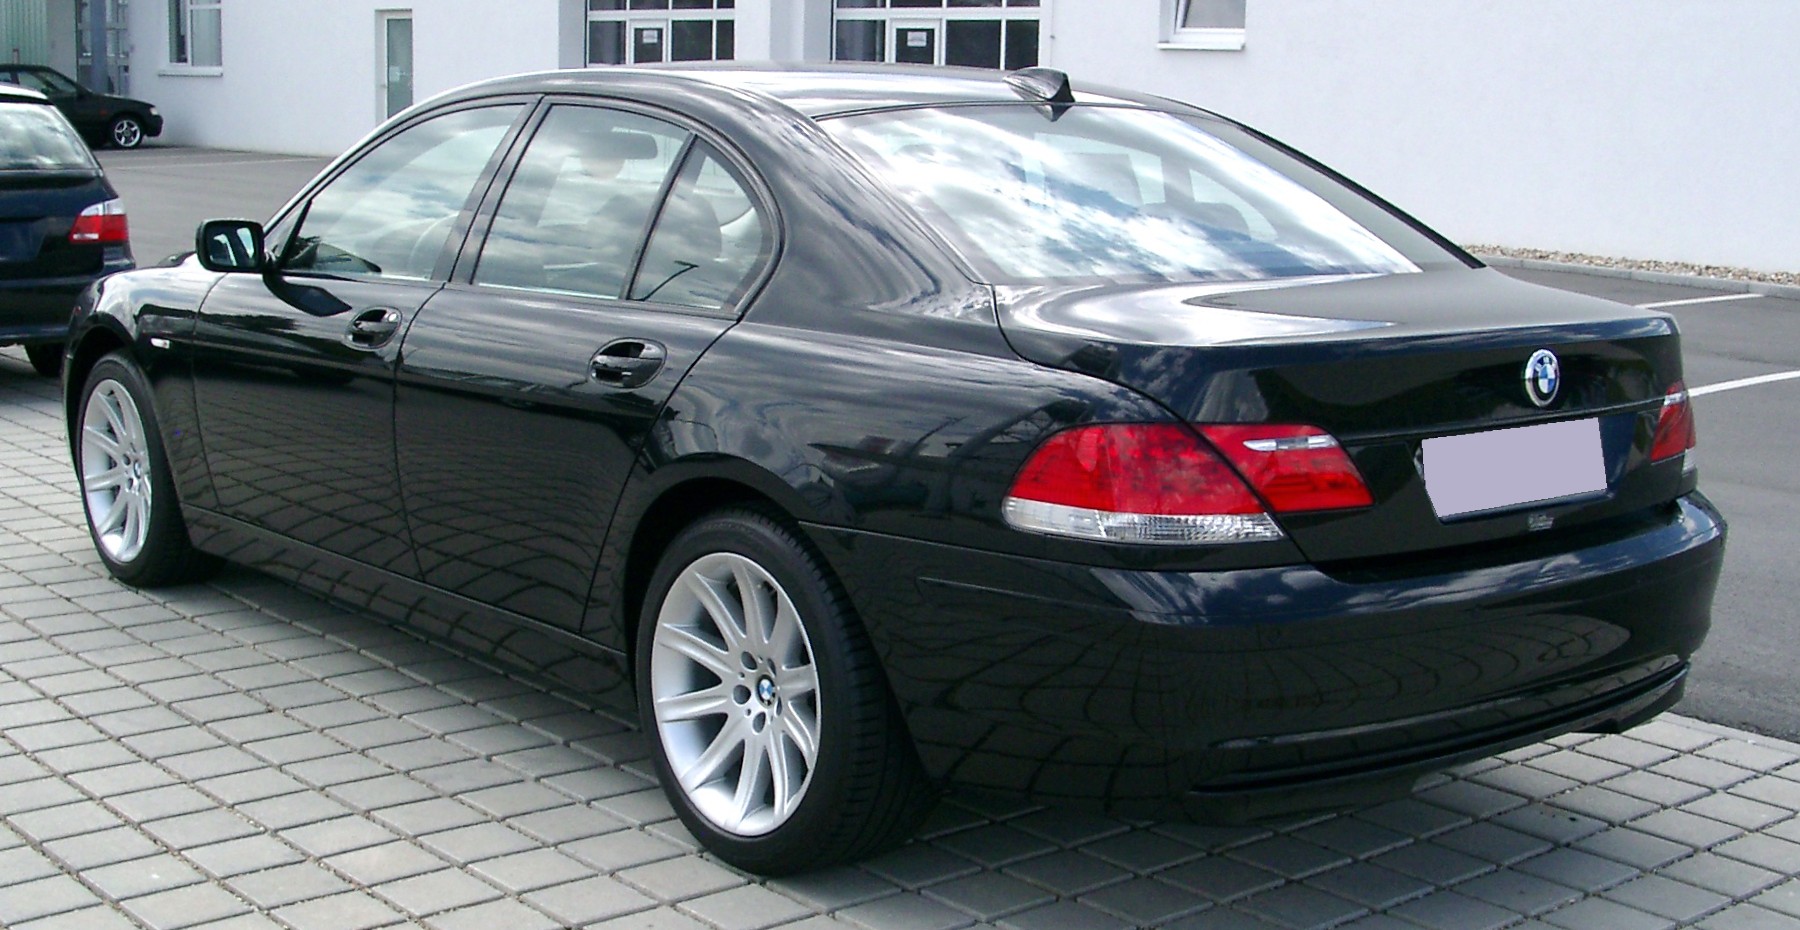 BMW 7 Series Exterior Rear Side View